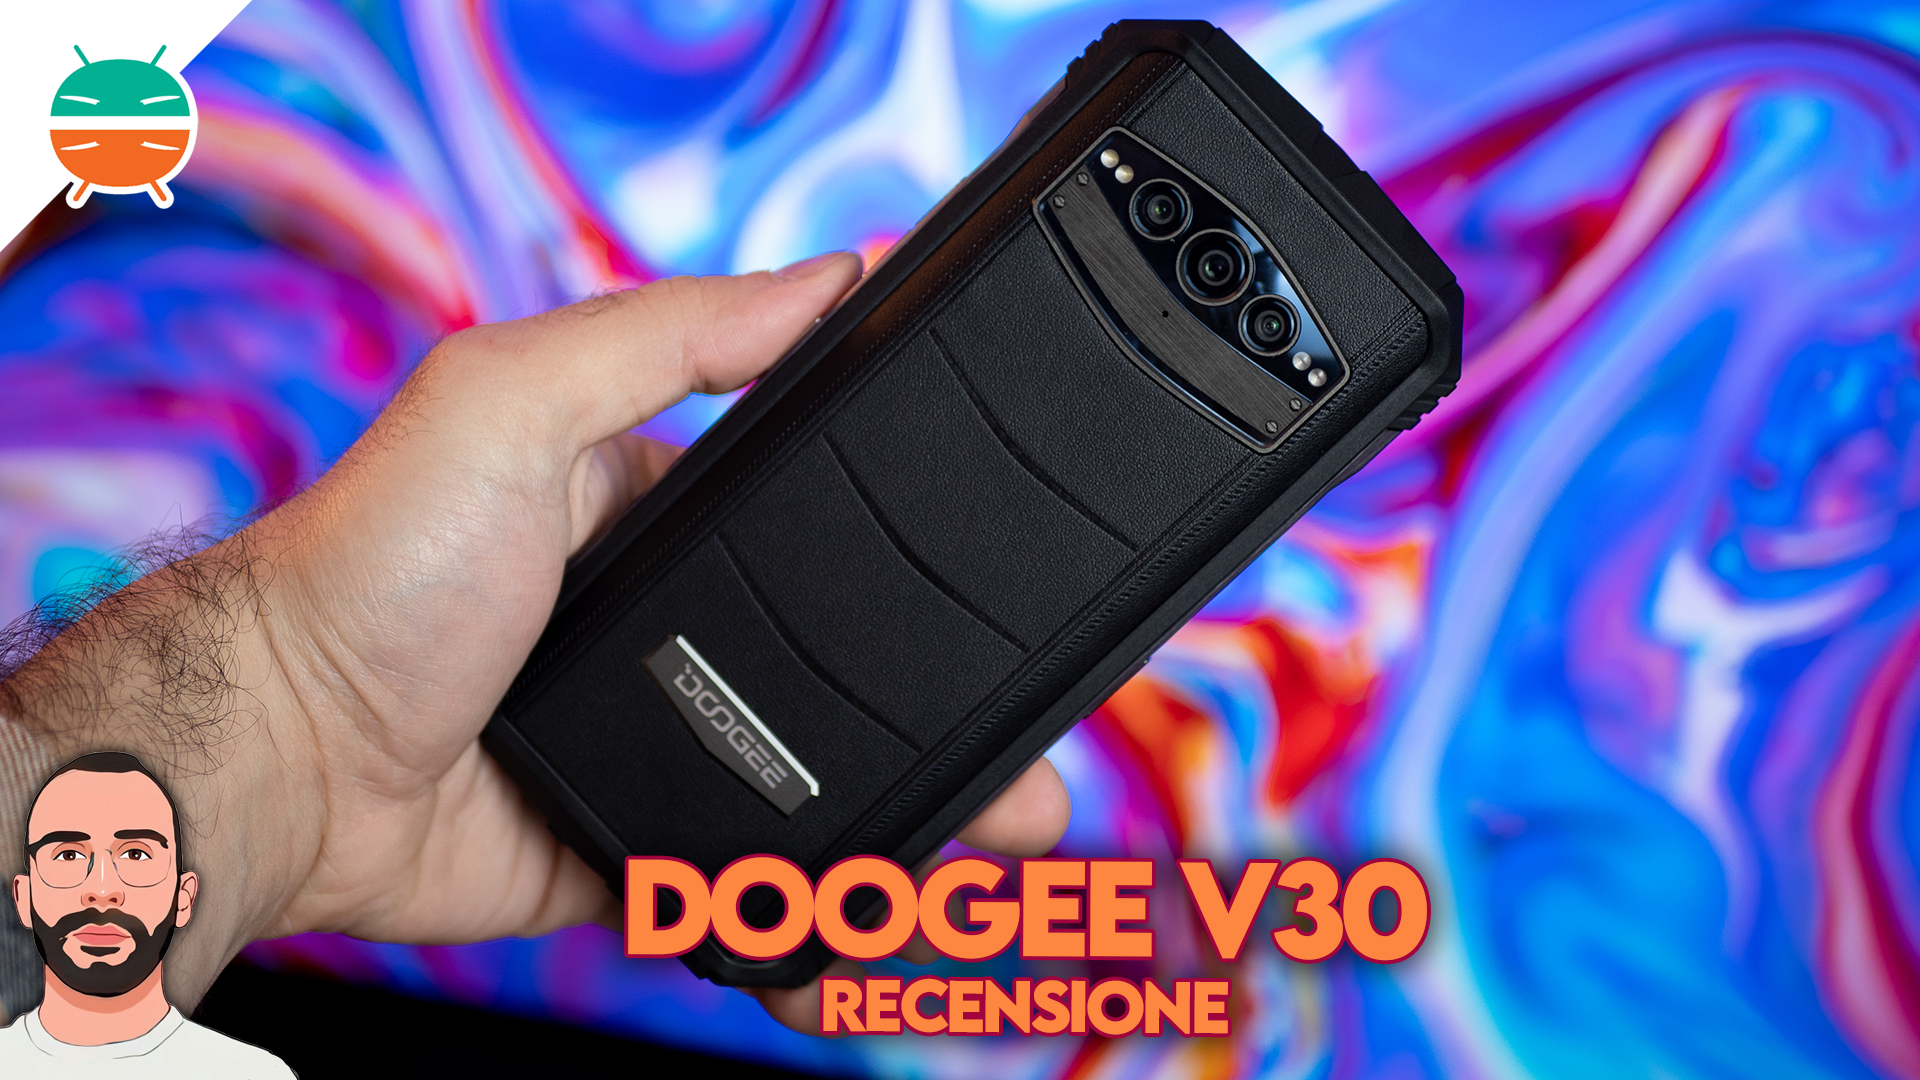 Doogee V30 will launch on December 22, specs & price revealed - Gizmochina